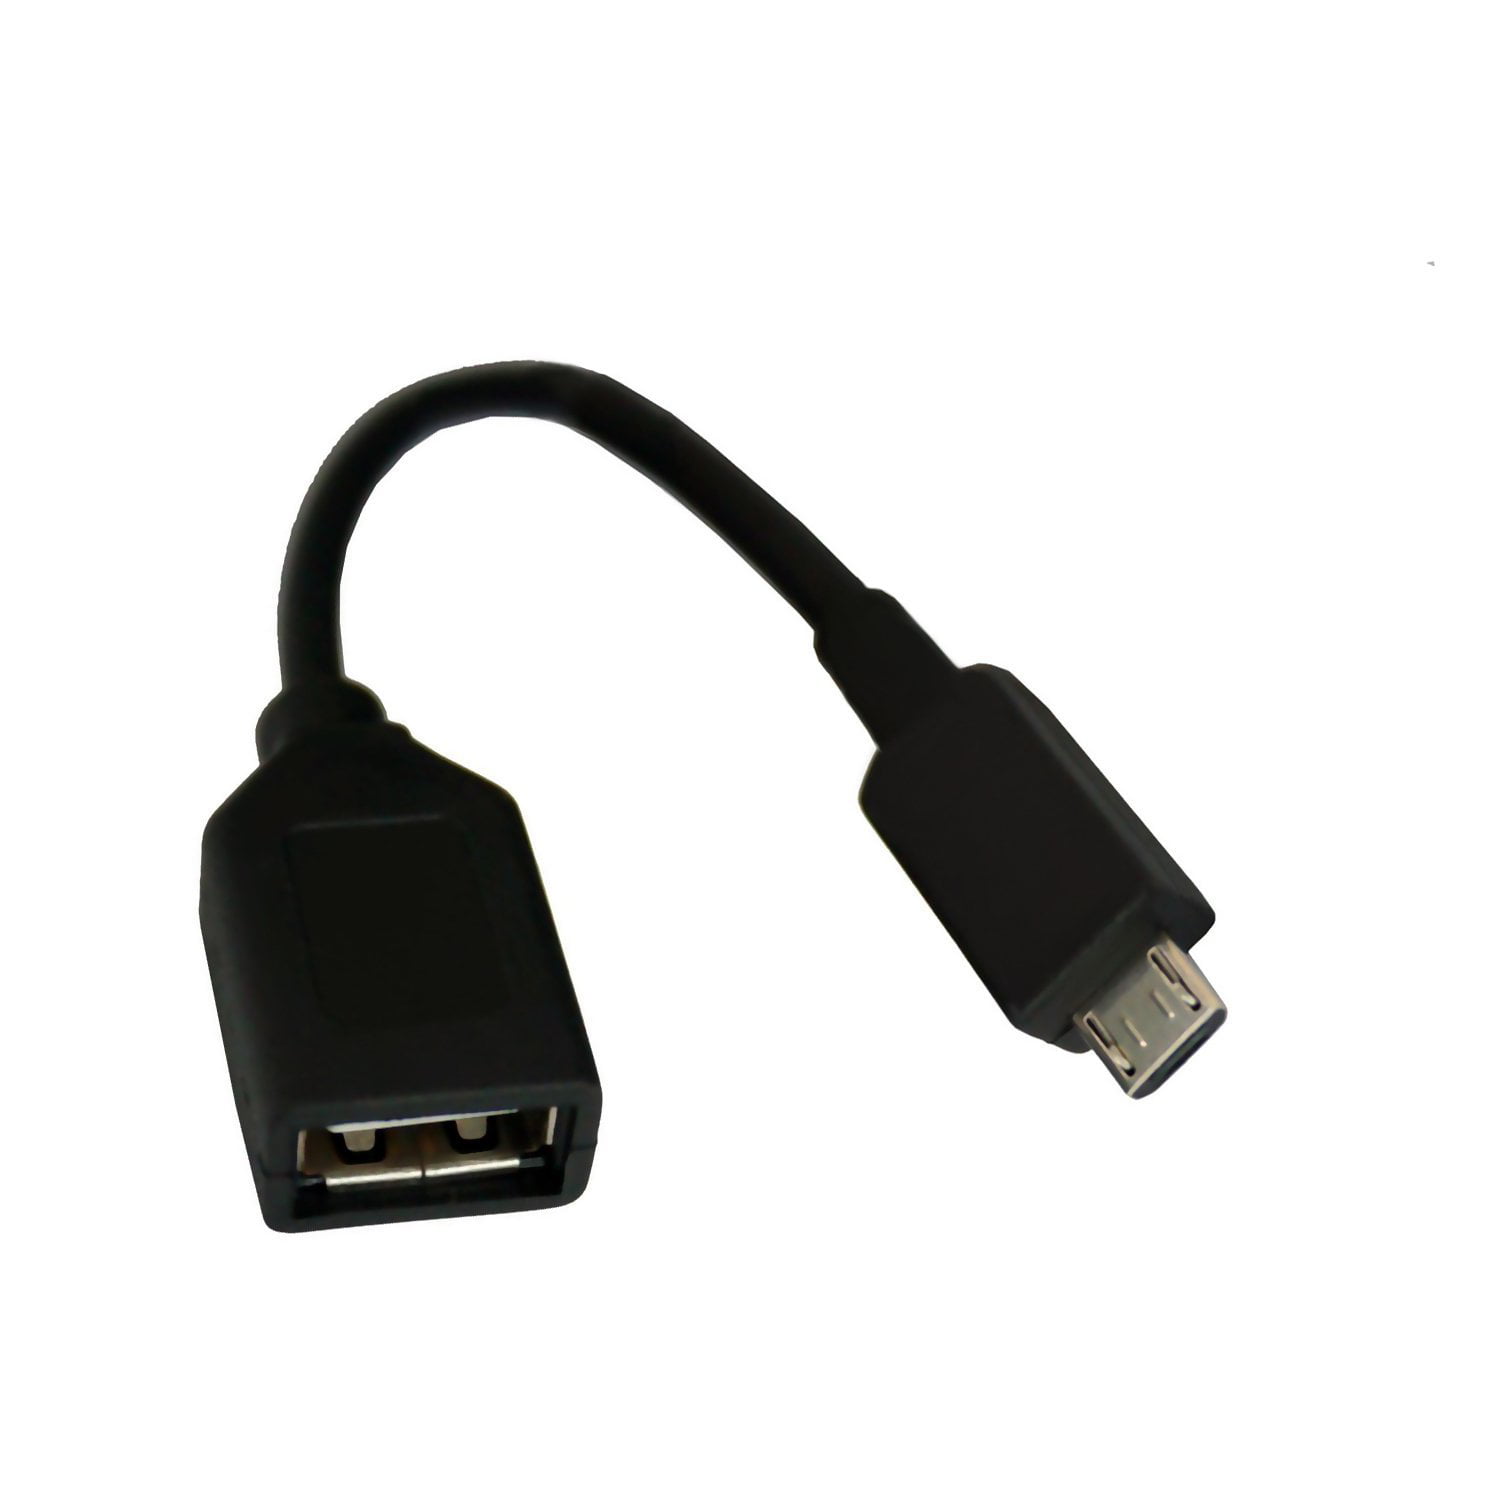 CNE46201 USB 2.0 A Female to Micro B Male Adapter Cable Micro USB Host